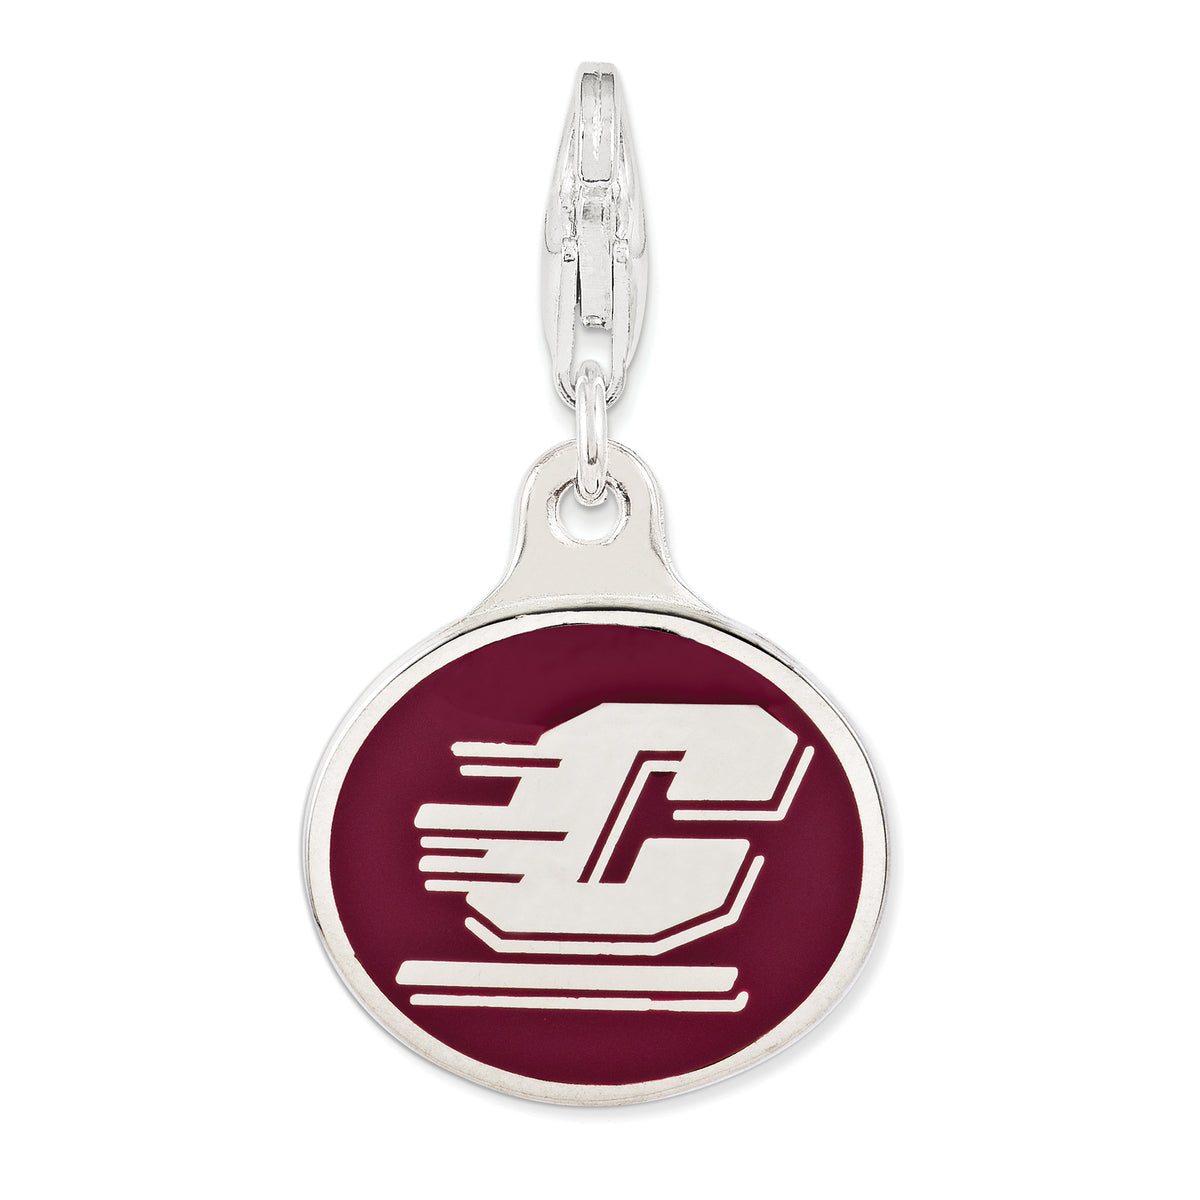 Amore La Vita Sterling Silver Rhodium-plated Polished Enameled Central Michigan University Charm with Fancy Lobster Clasp